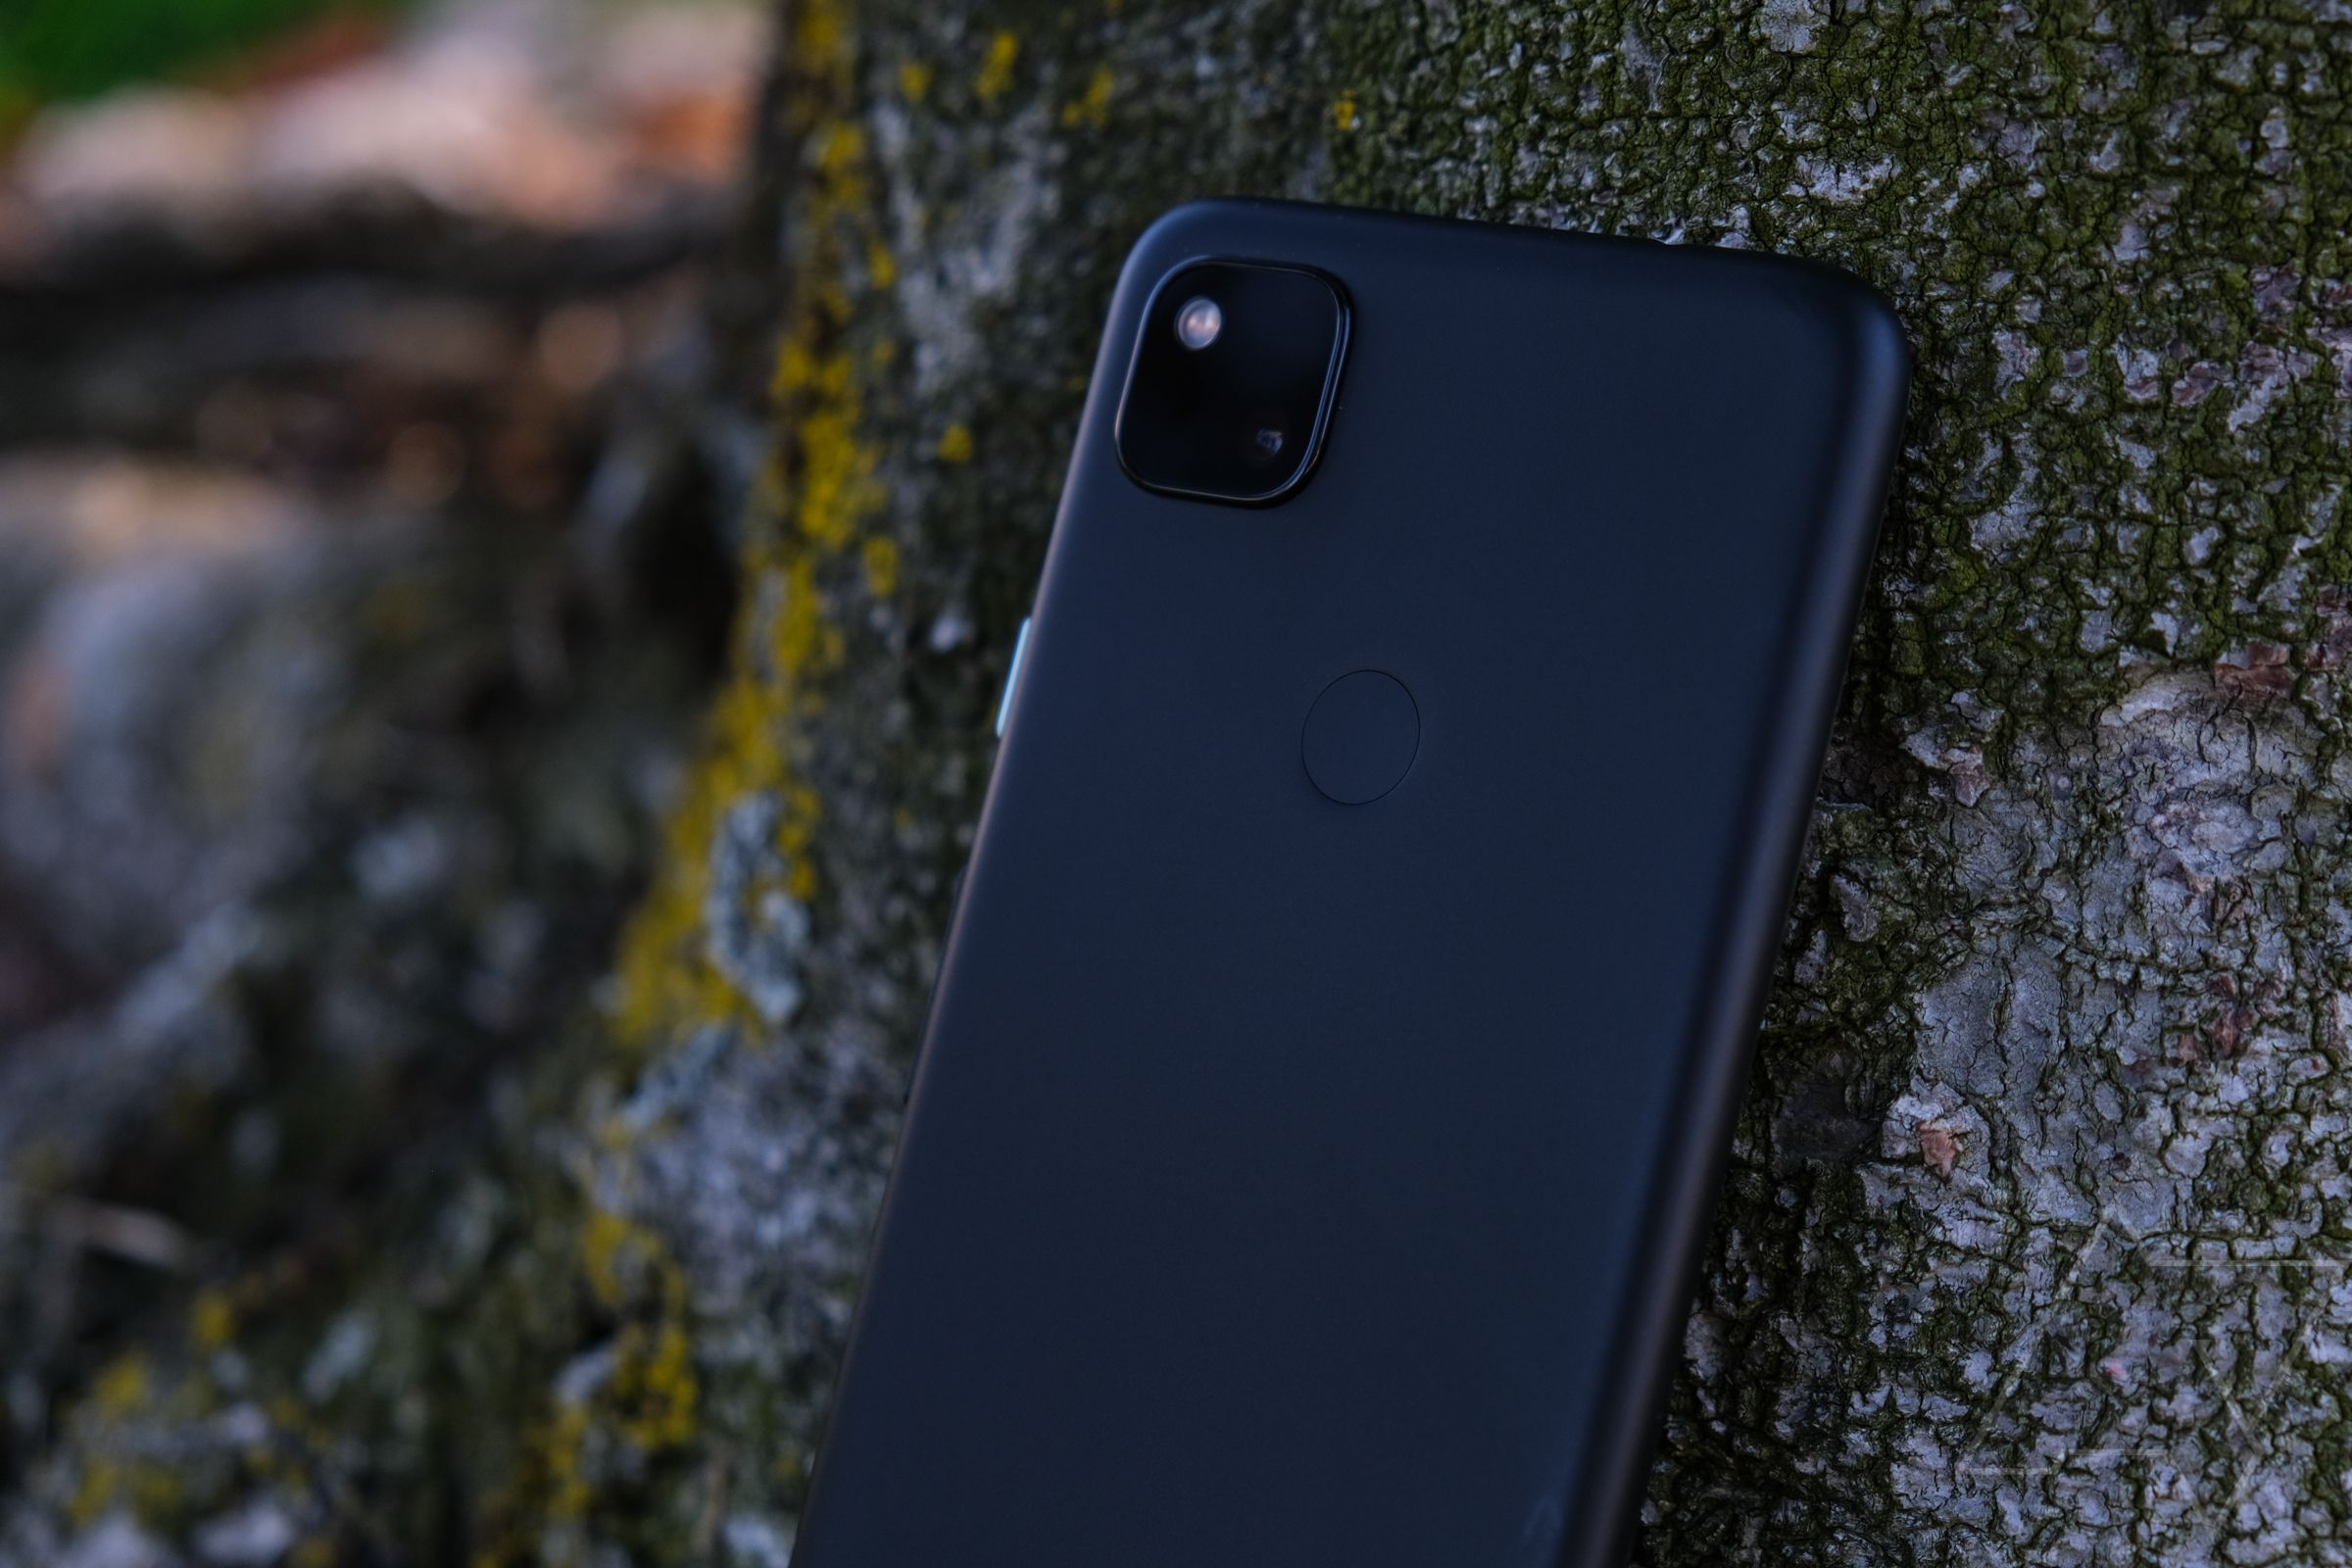 A Google Pixel 4a leaning against a tree